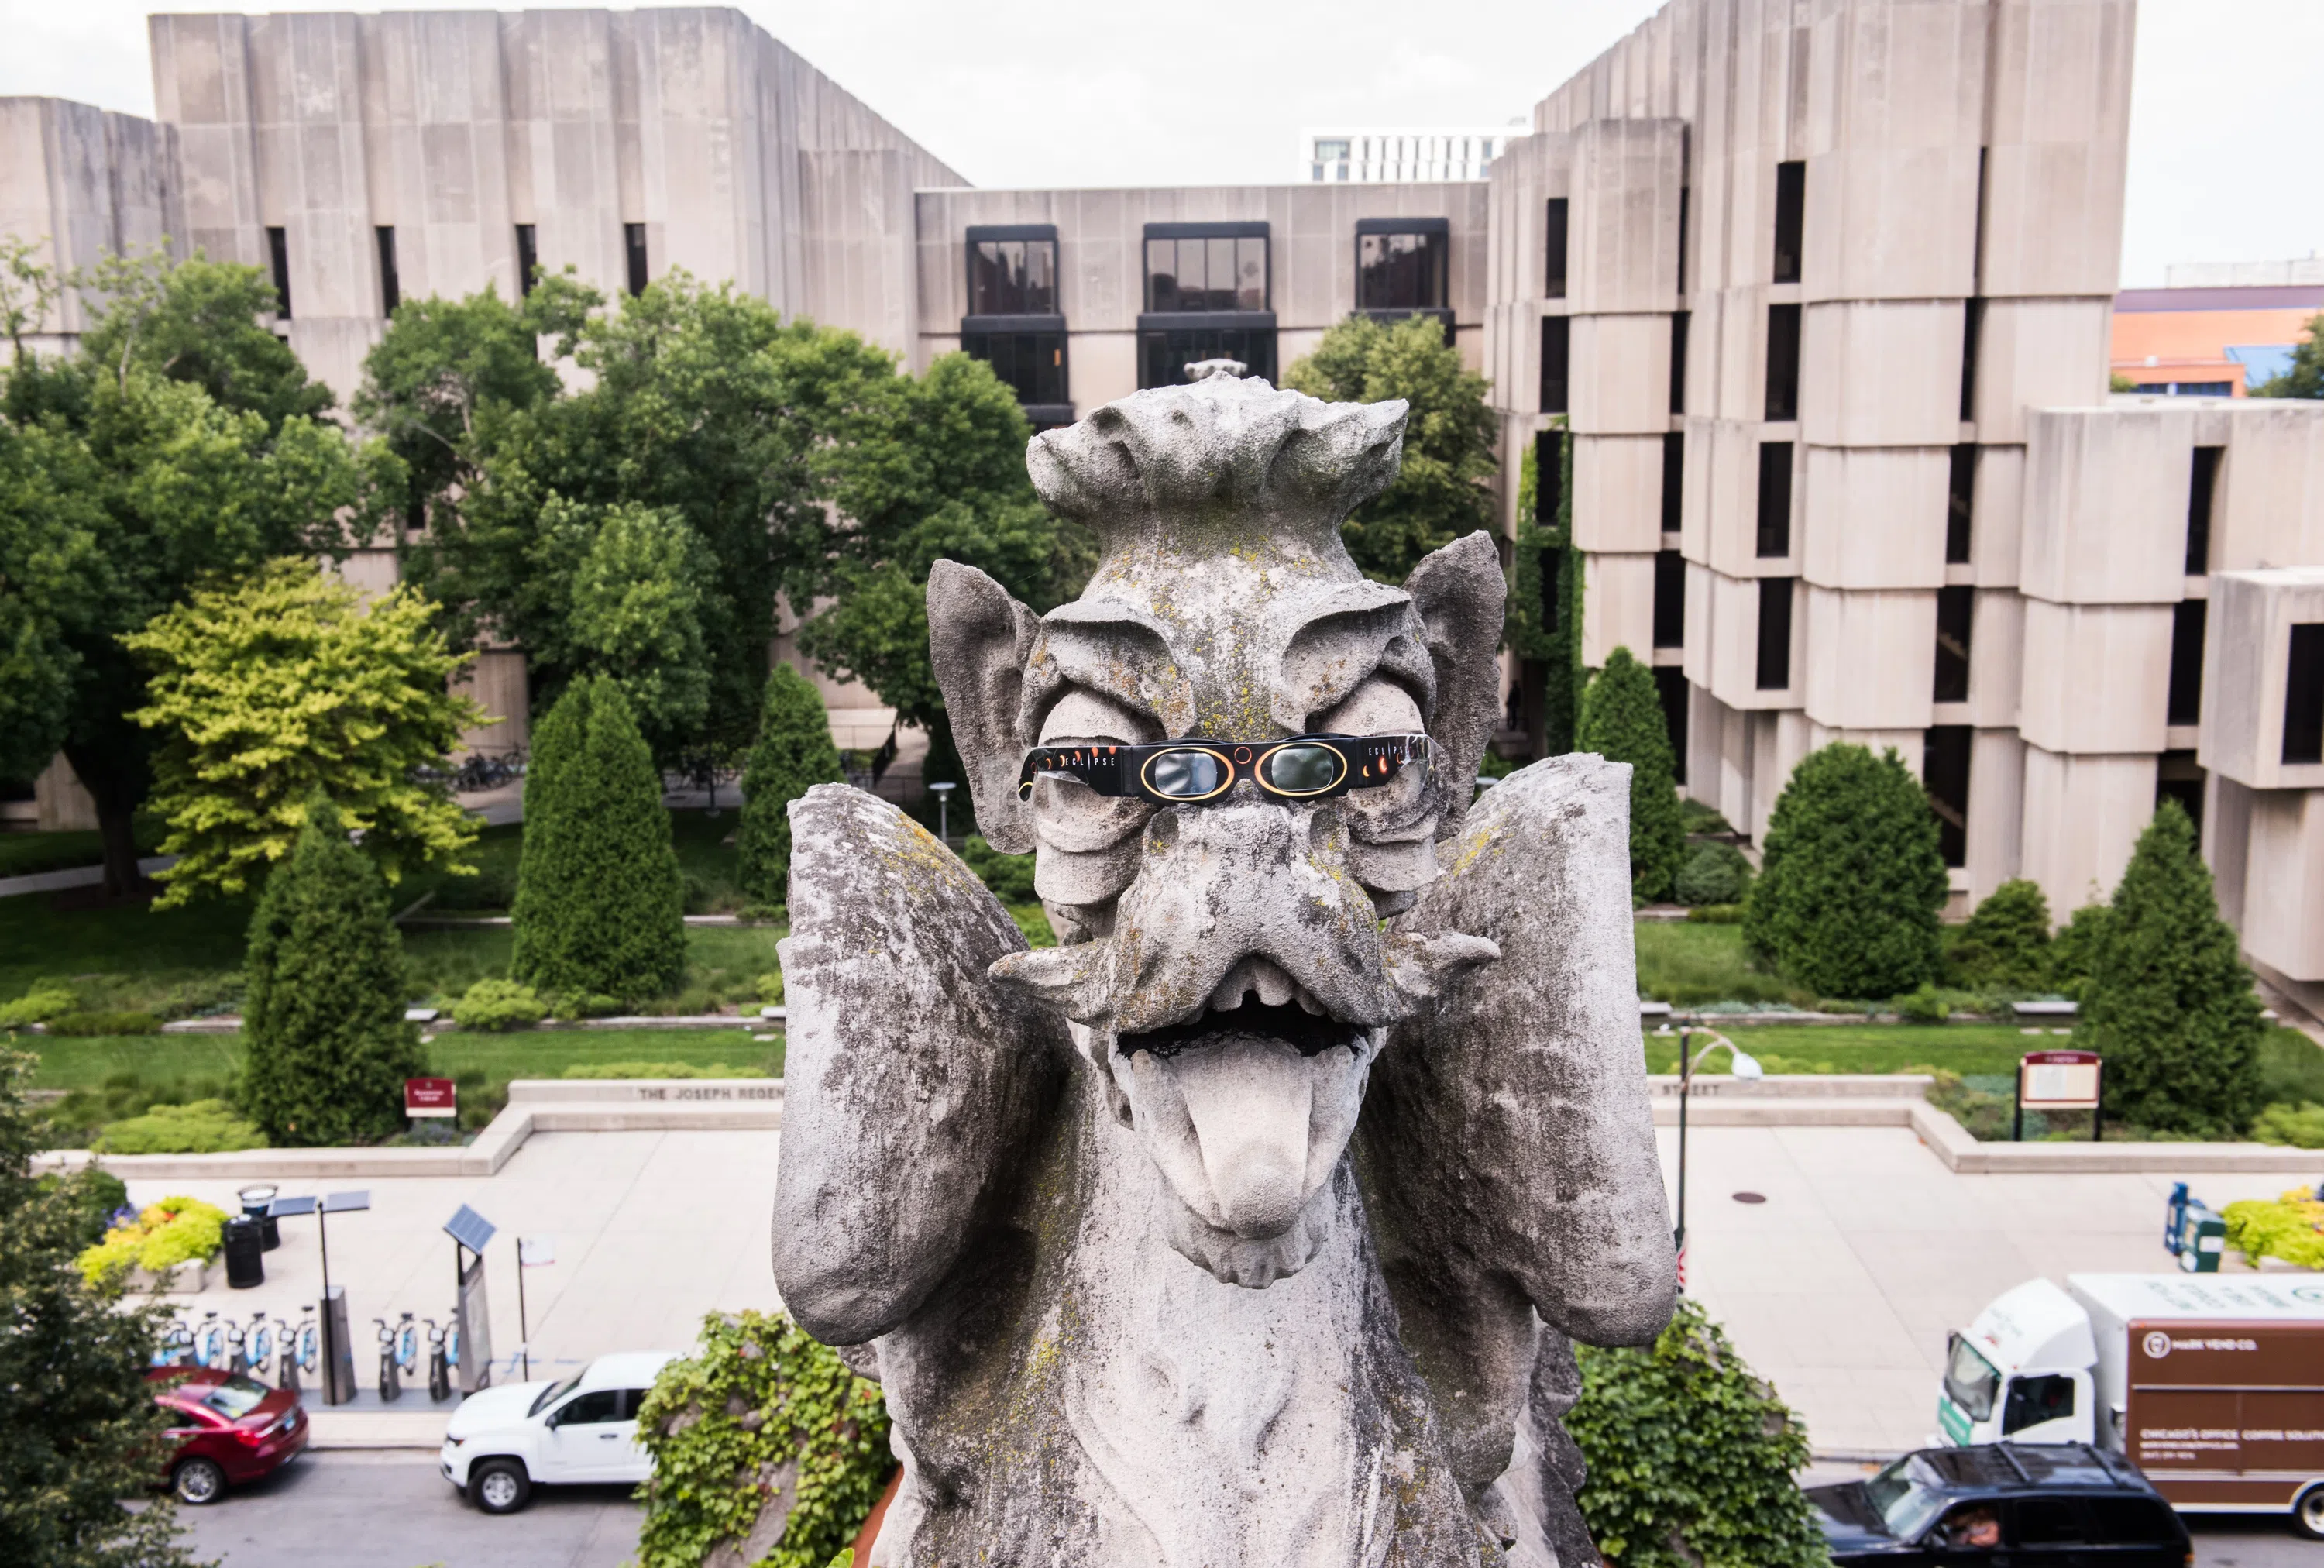 photo of the Regenstein library with a gargoyle in the foreground